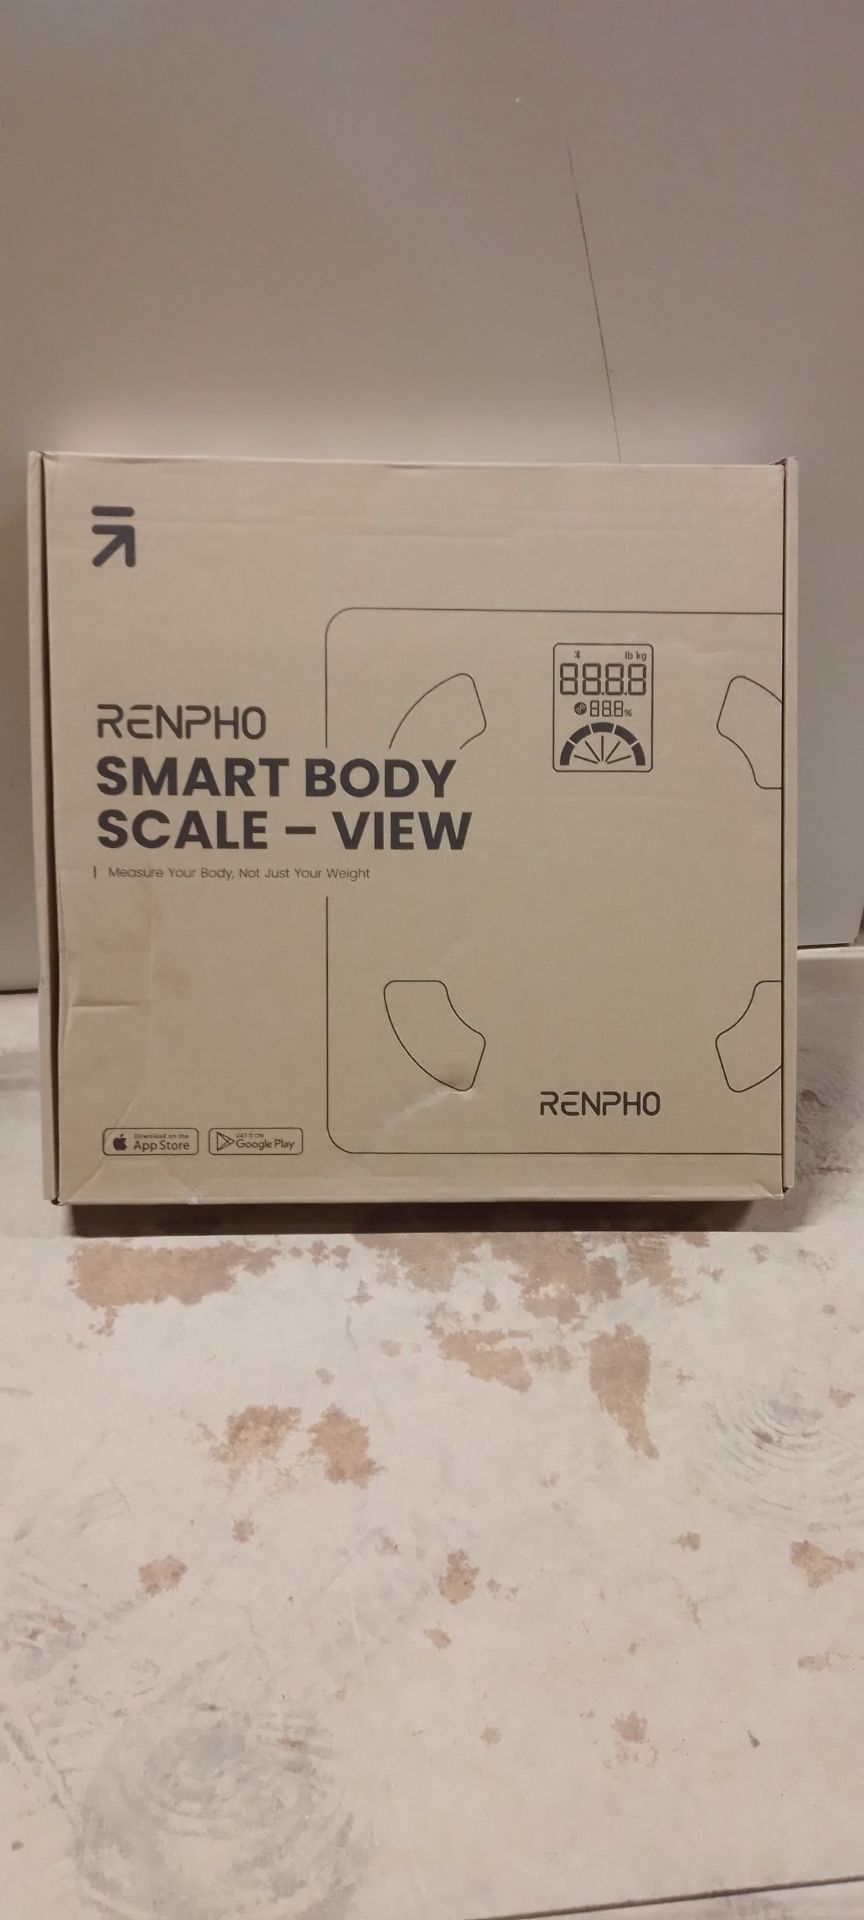 RRP £34.24 RENPHO Scale for Body Weight and BMI - Image 2 of 2